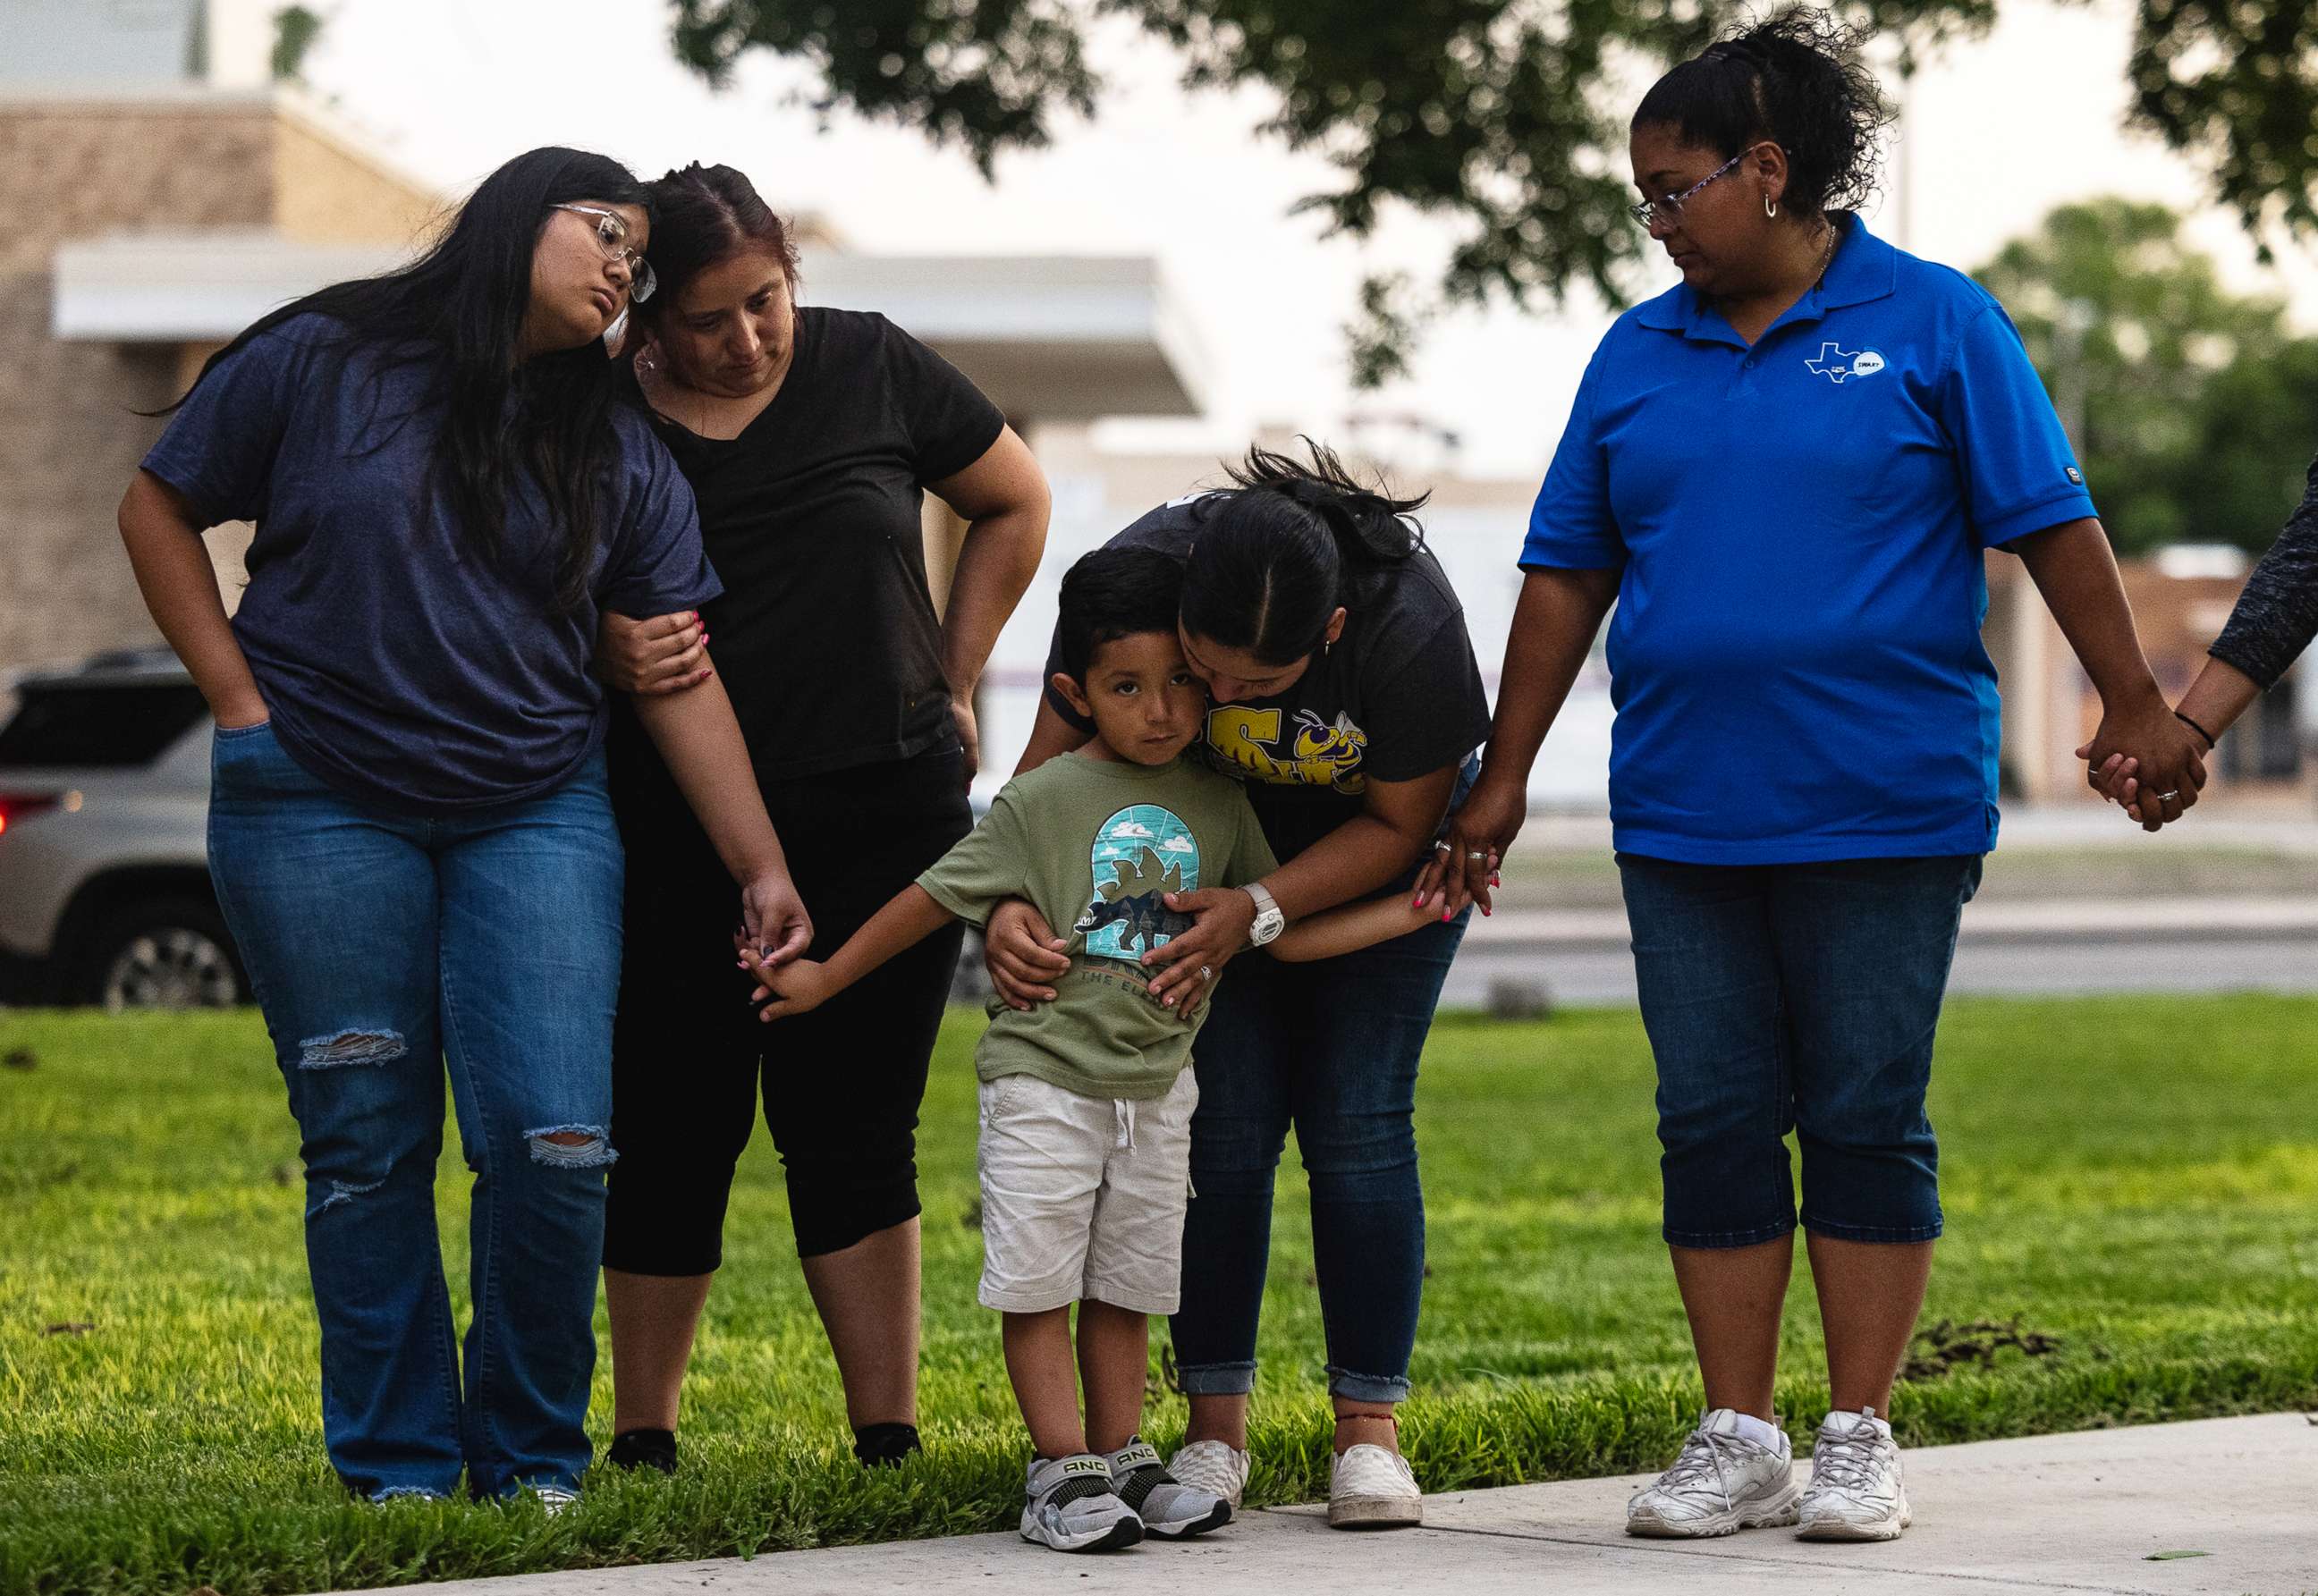 PHOTO: Members of the community gather at the City of Uvalde Town Square for a prayer vigil in the wake of a mass shooting at Robb Elementary School on May 24, 2022, in Uvalde, Texas.